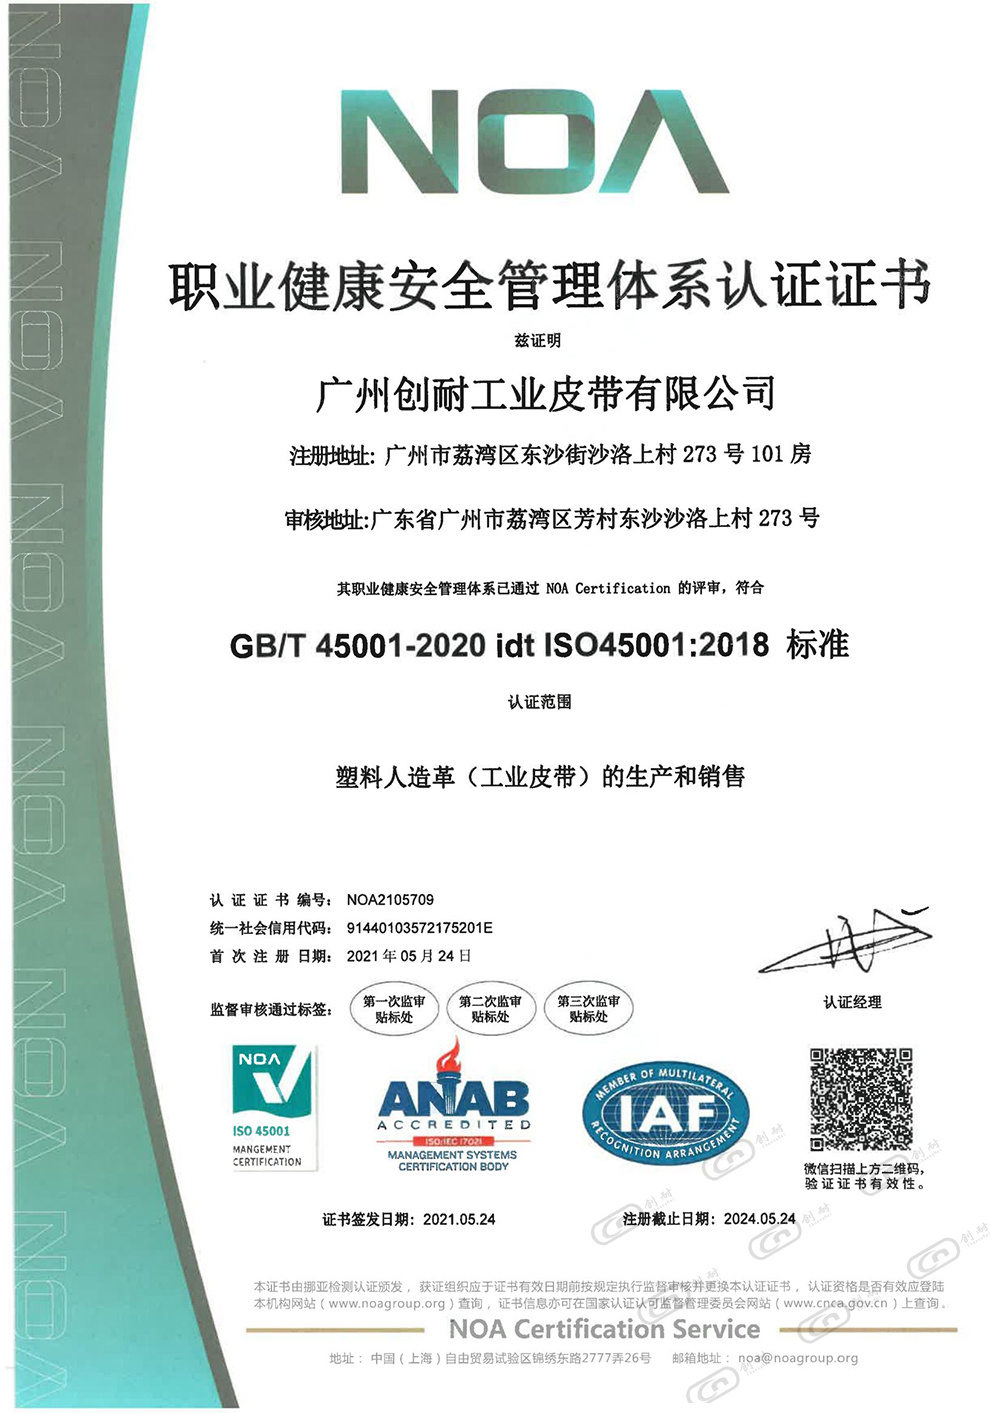 Occupational Health and safety management system certification